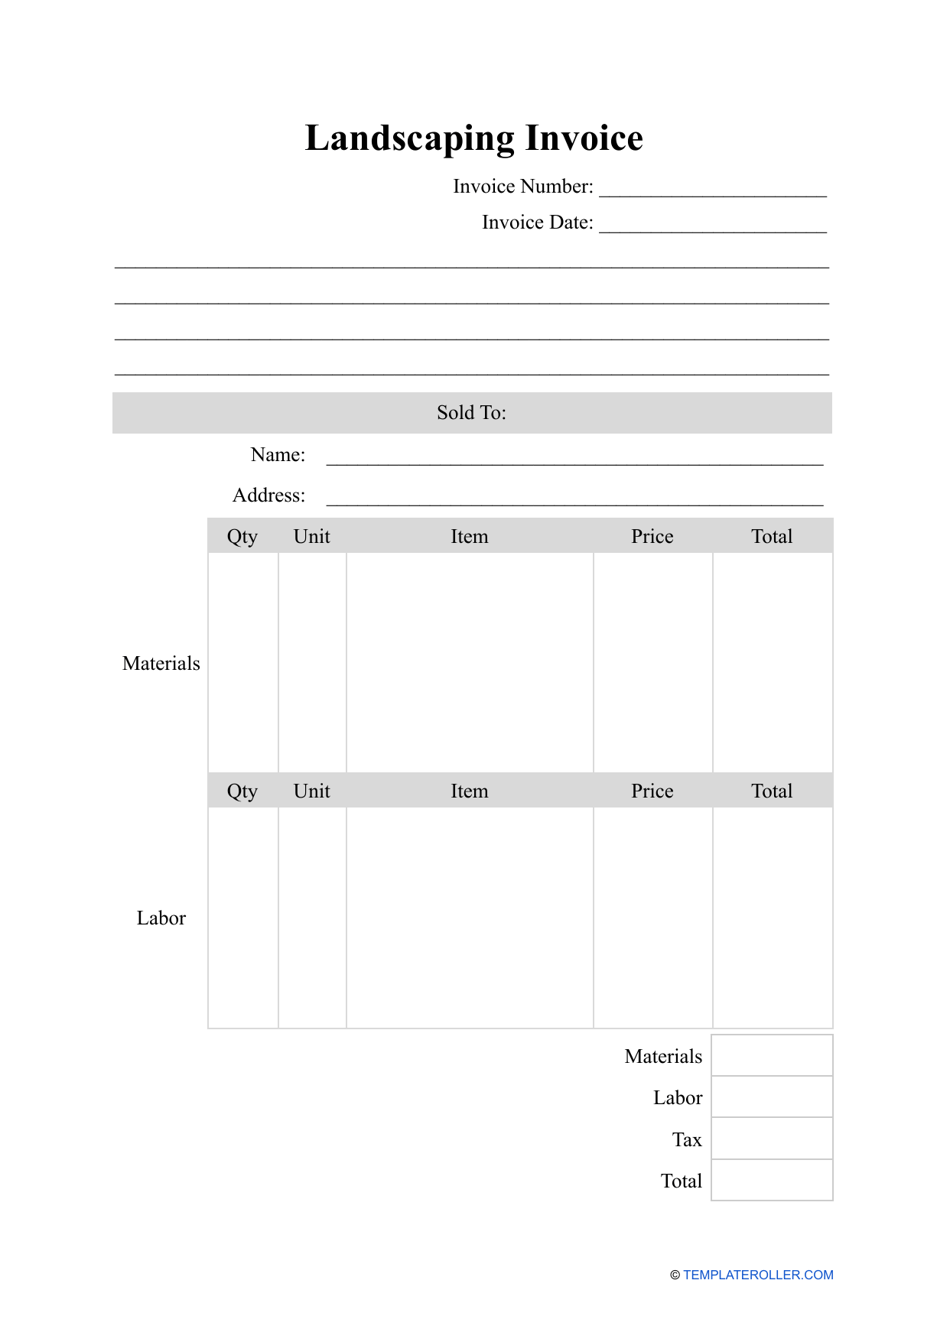 Landscaping Invoice Template Download Printable PDF | Templateroller